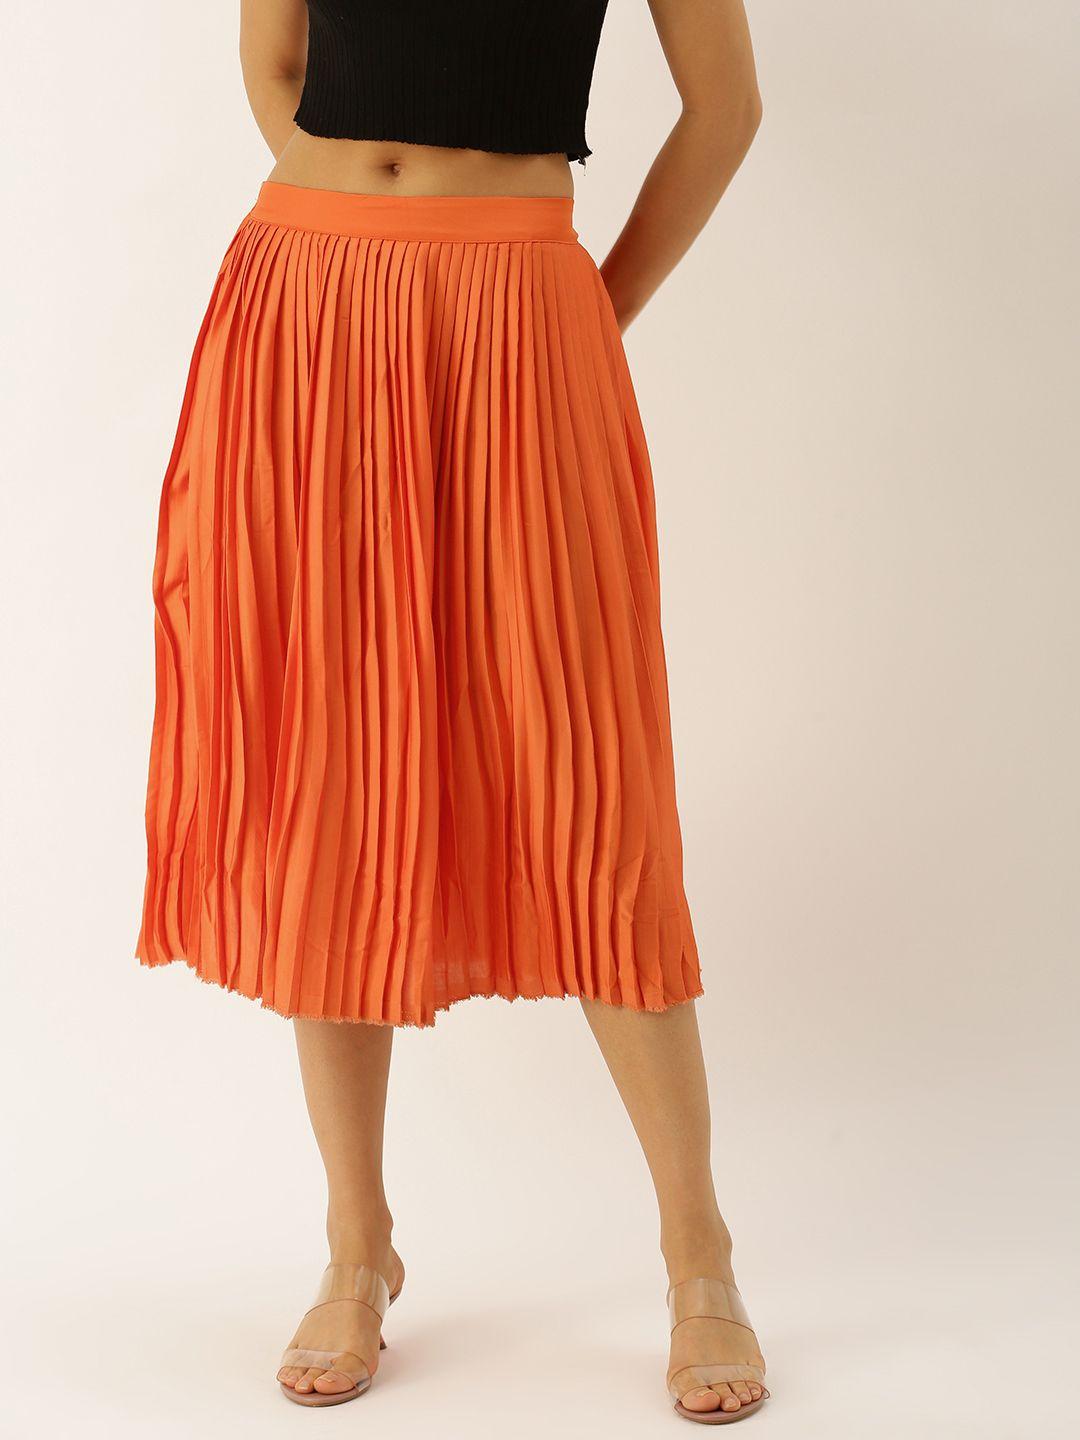 antheaa-women-orange-solid-accordion-pleated-a-line-skirt